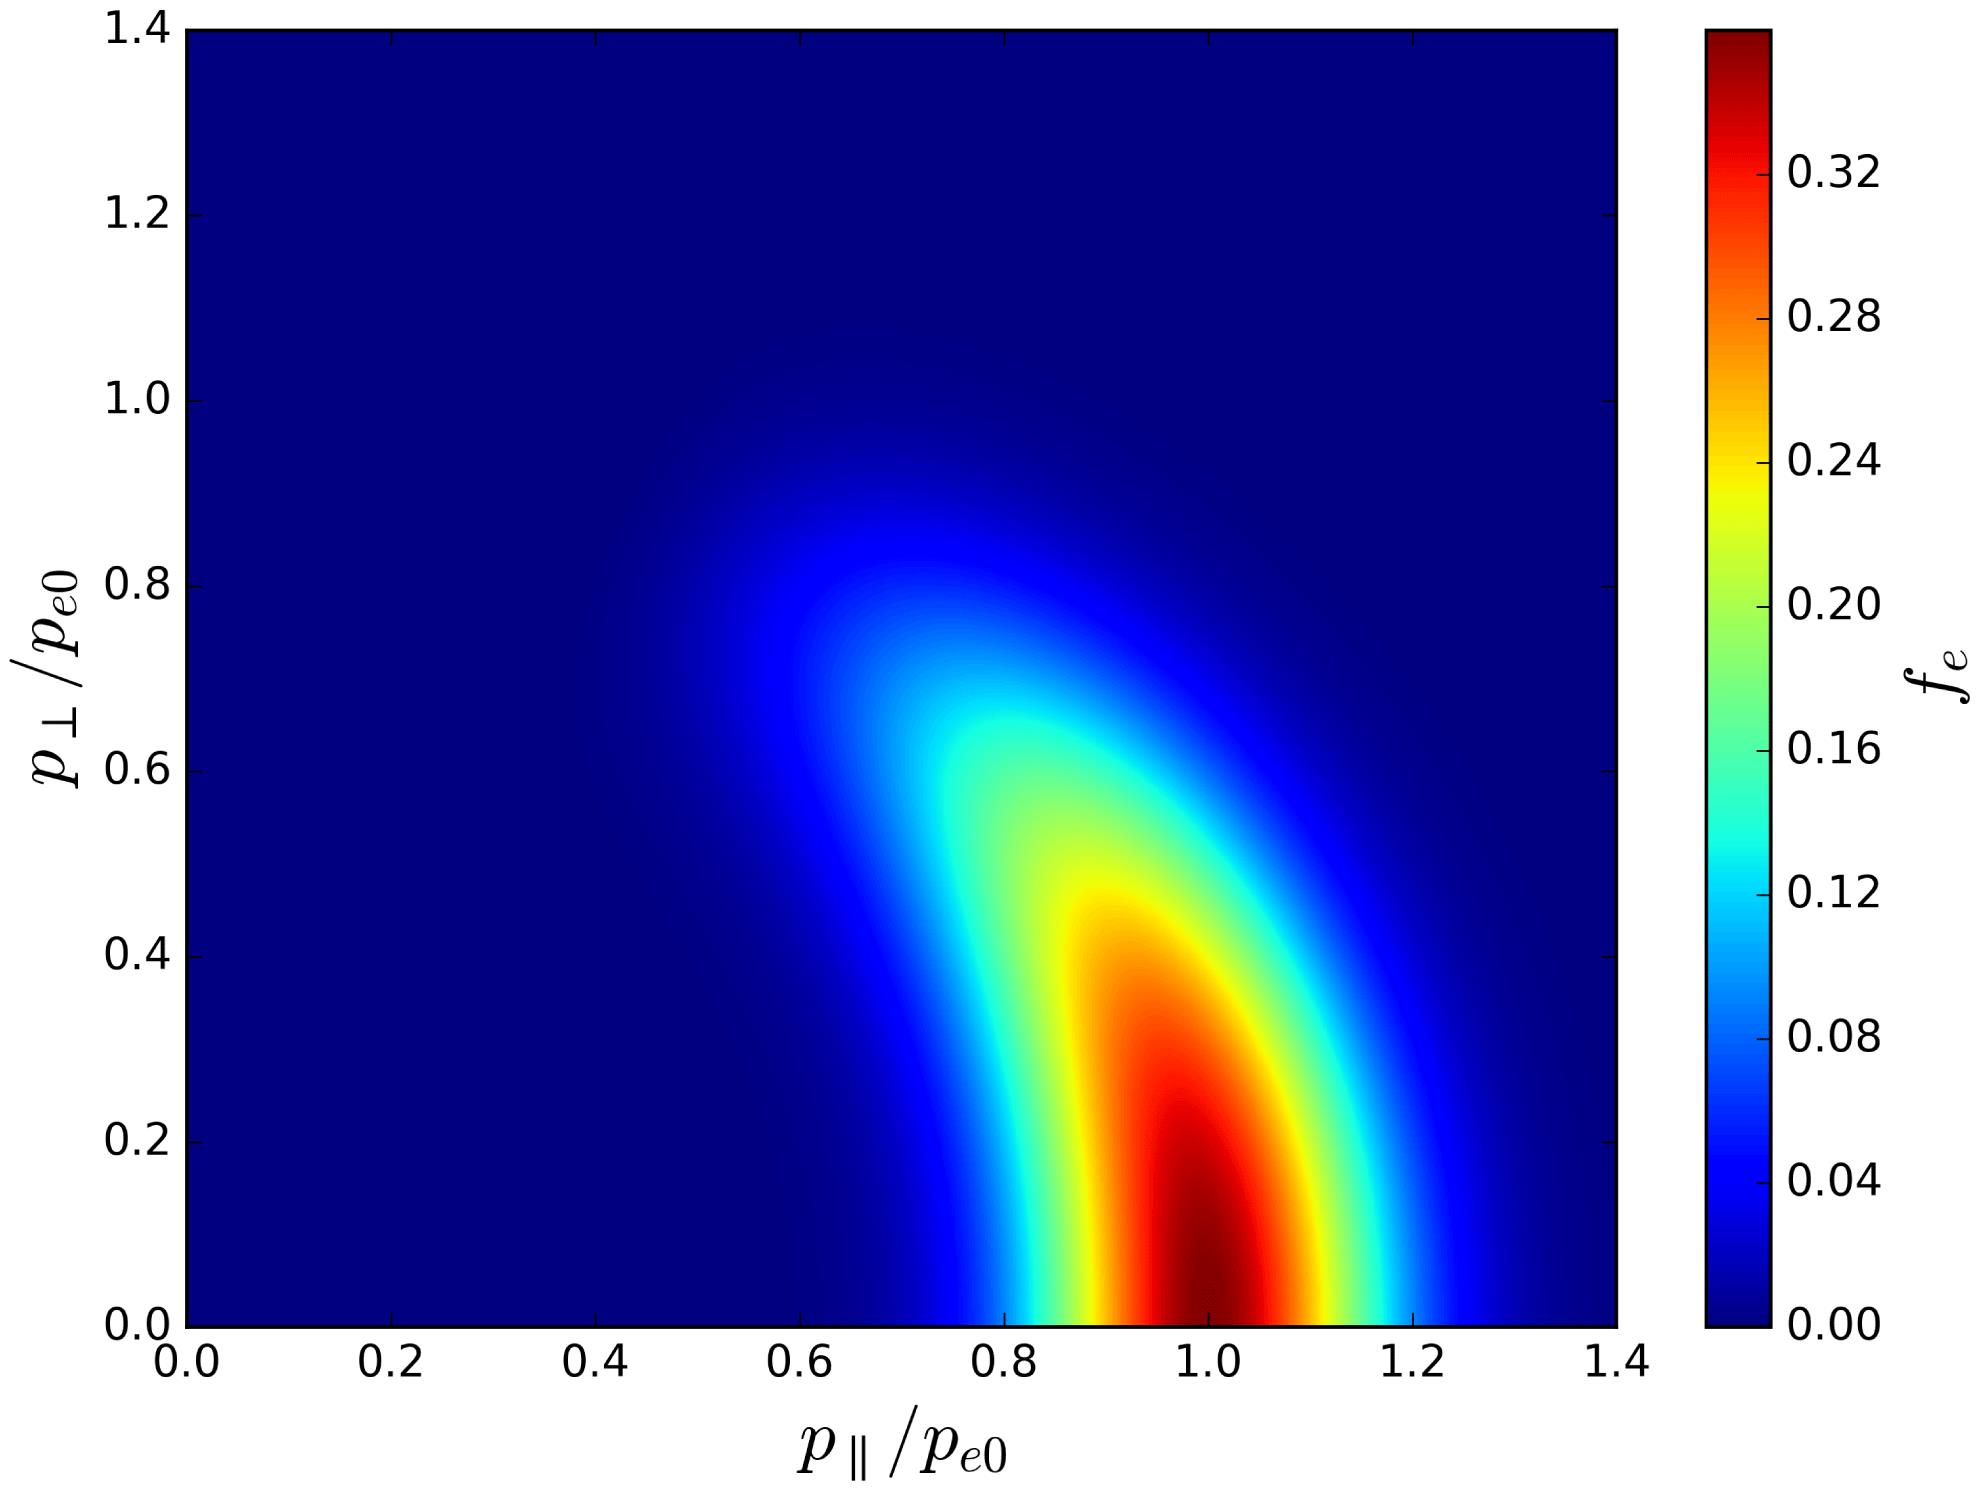 Perpendicular and parallel components of electron momentum (normalized to the mean electron momentum $p_{e0}$) for an evolved horseshoe distribution function, with the contours representing constant phase-space density.